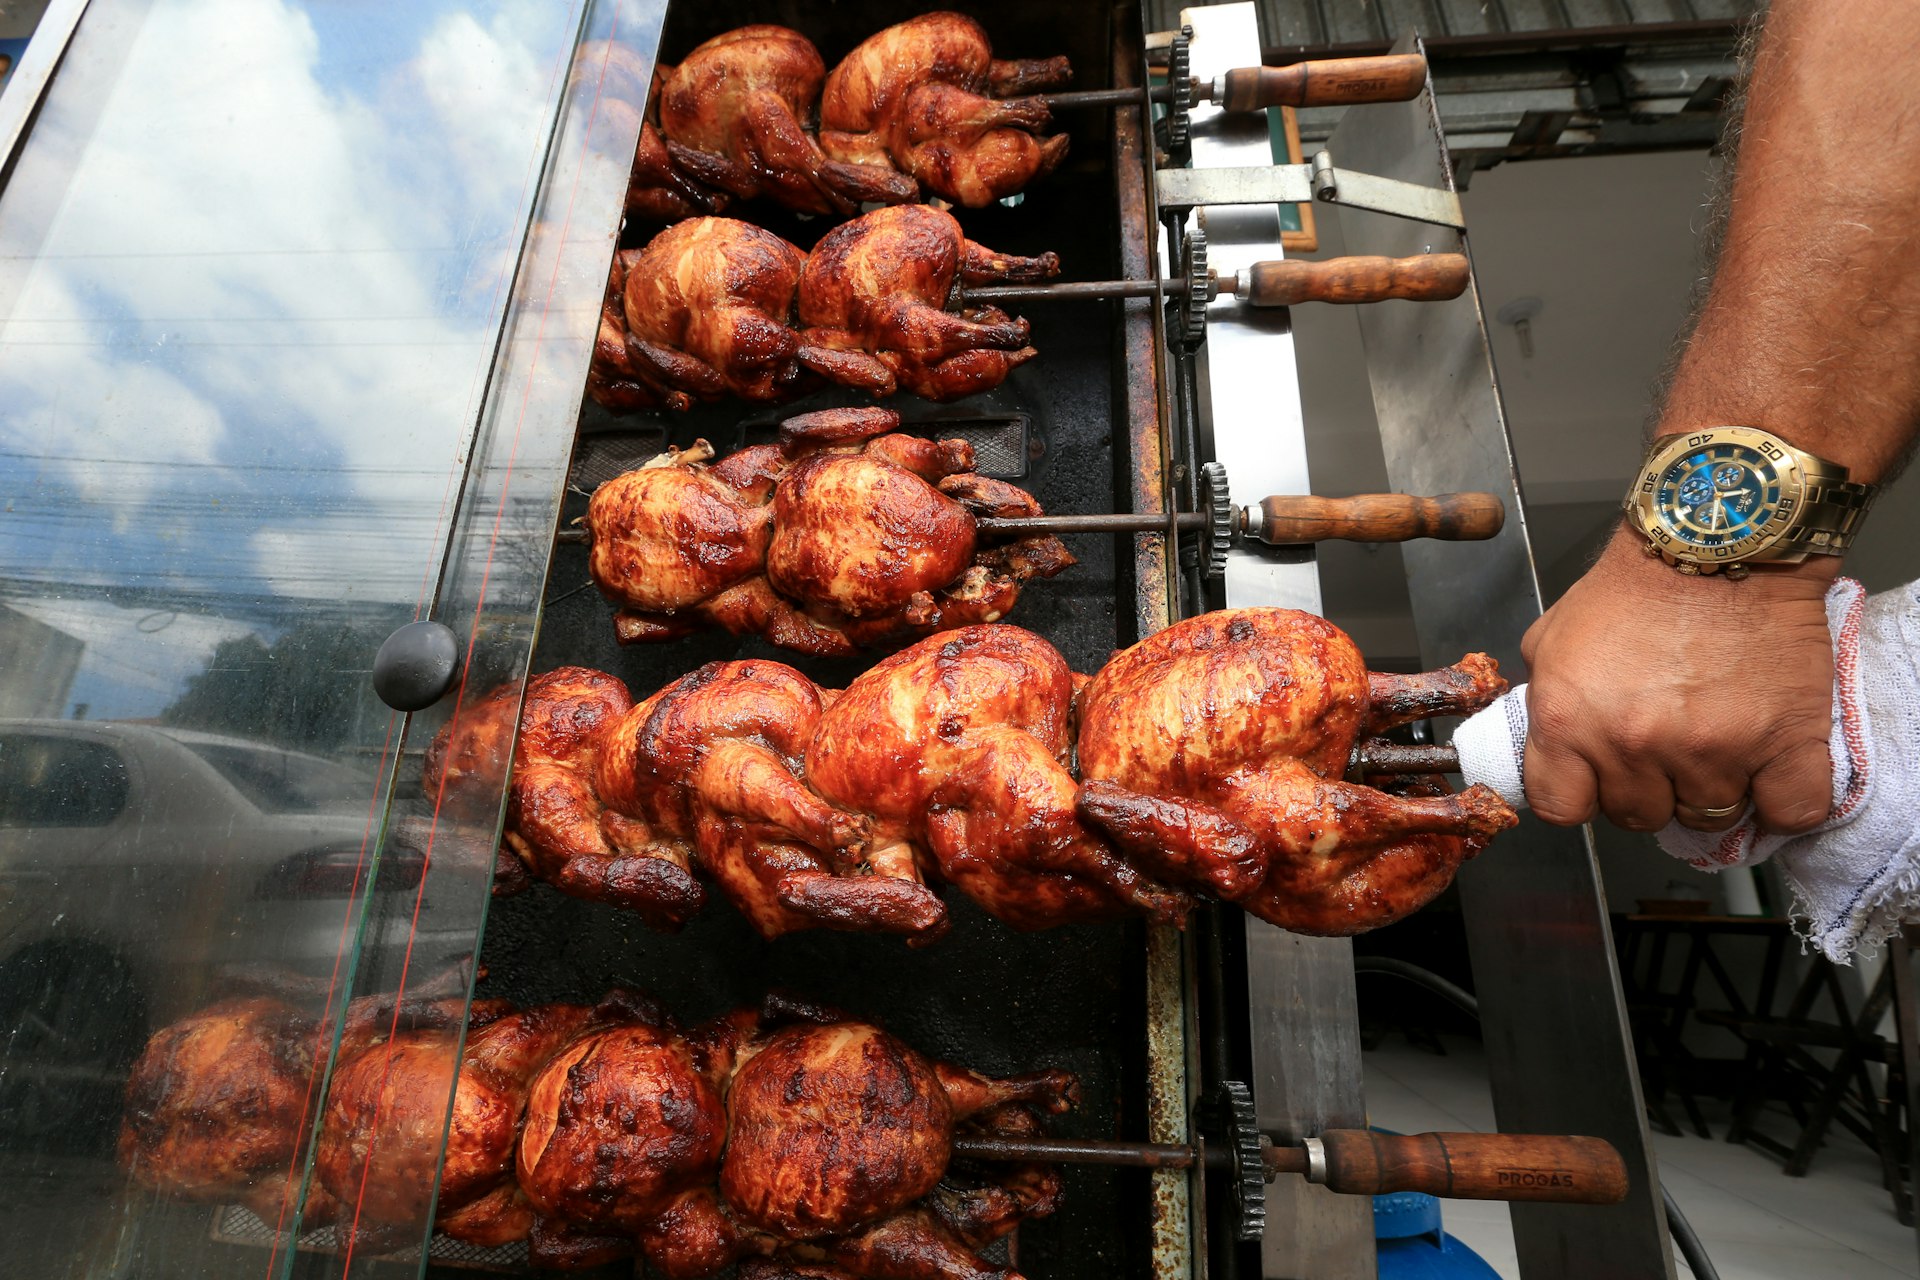 Rows of whole chickens on skewers roasting on a grill outside, a hand gripping a towel turning one of the skewers. At a street restaurant in Salvador, Brazil